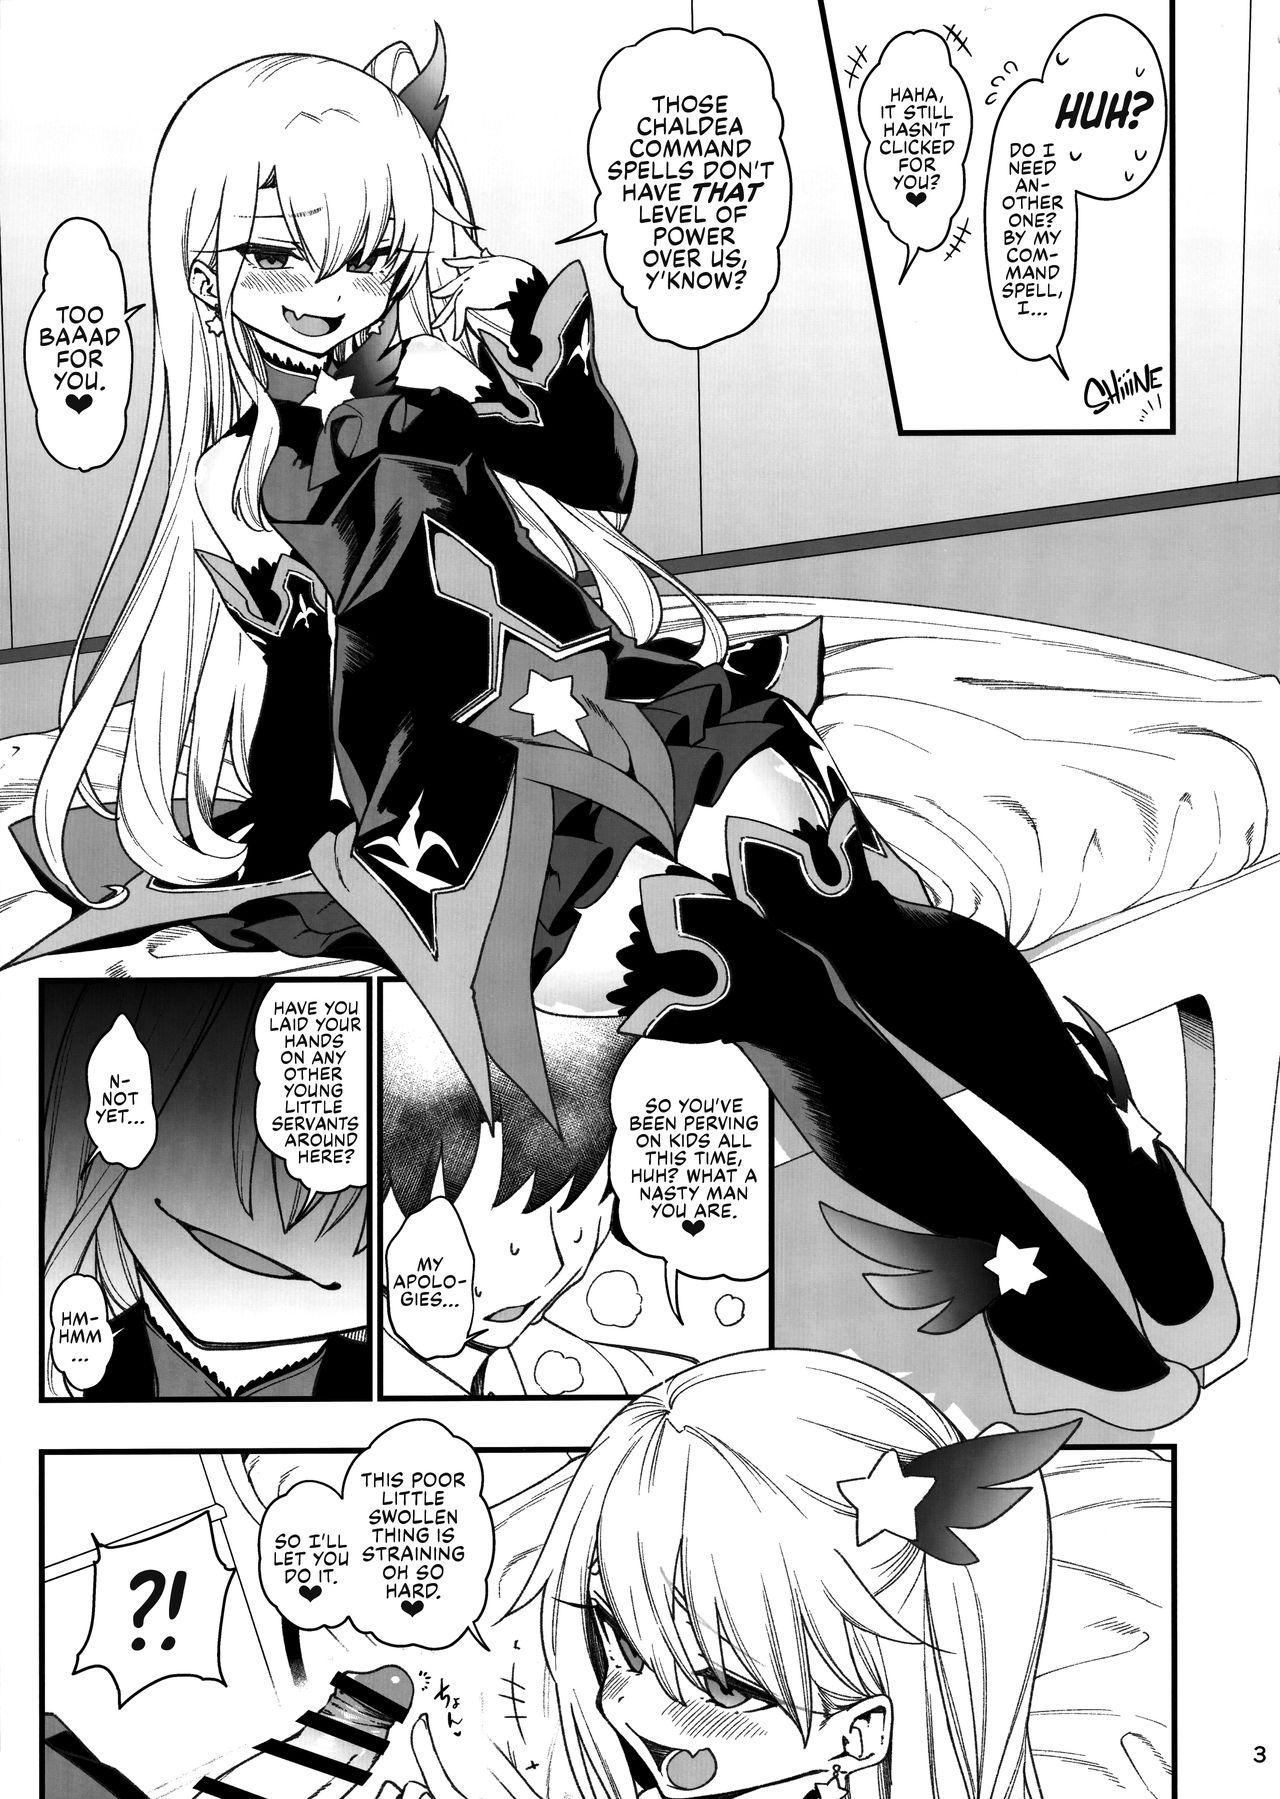 T Girl Mesugaki Testament Form-chan o Wakarasetai | That Slutty Little Testament Form Brat! I Want to Teach Her a Lesson! - Fate grand order Inked - Page 4